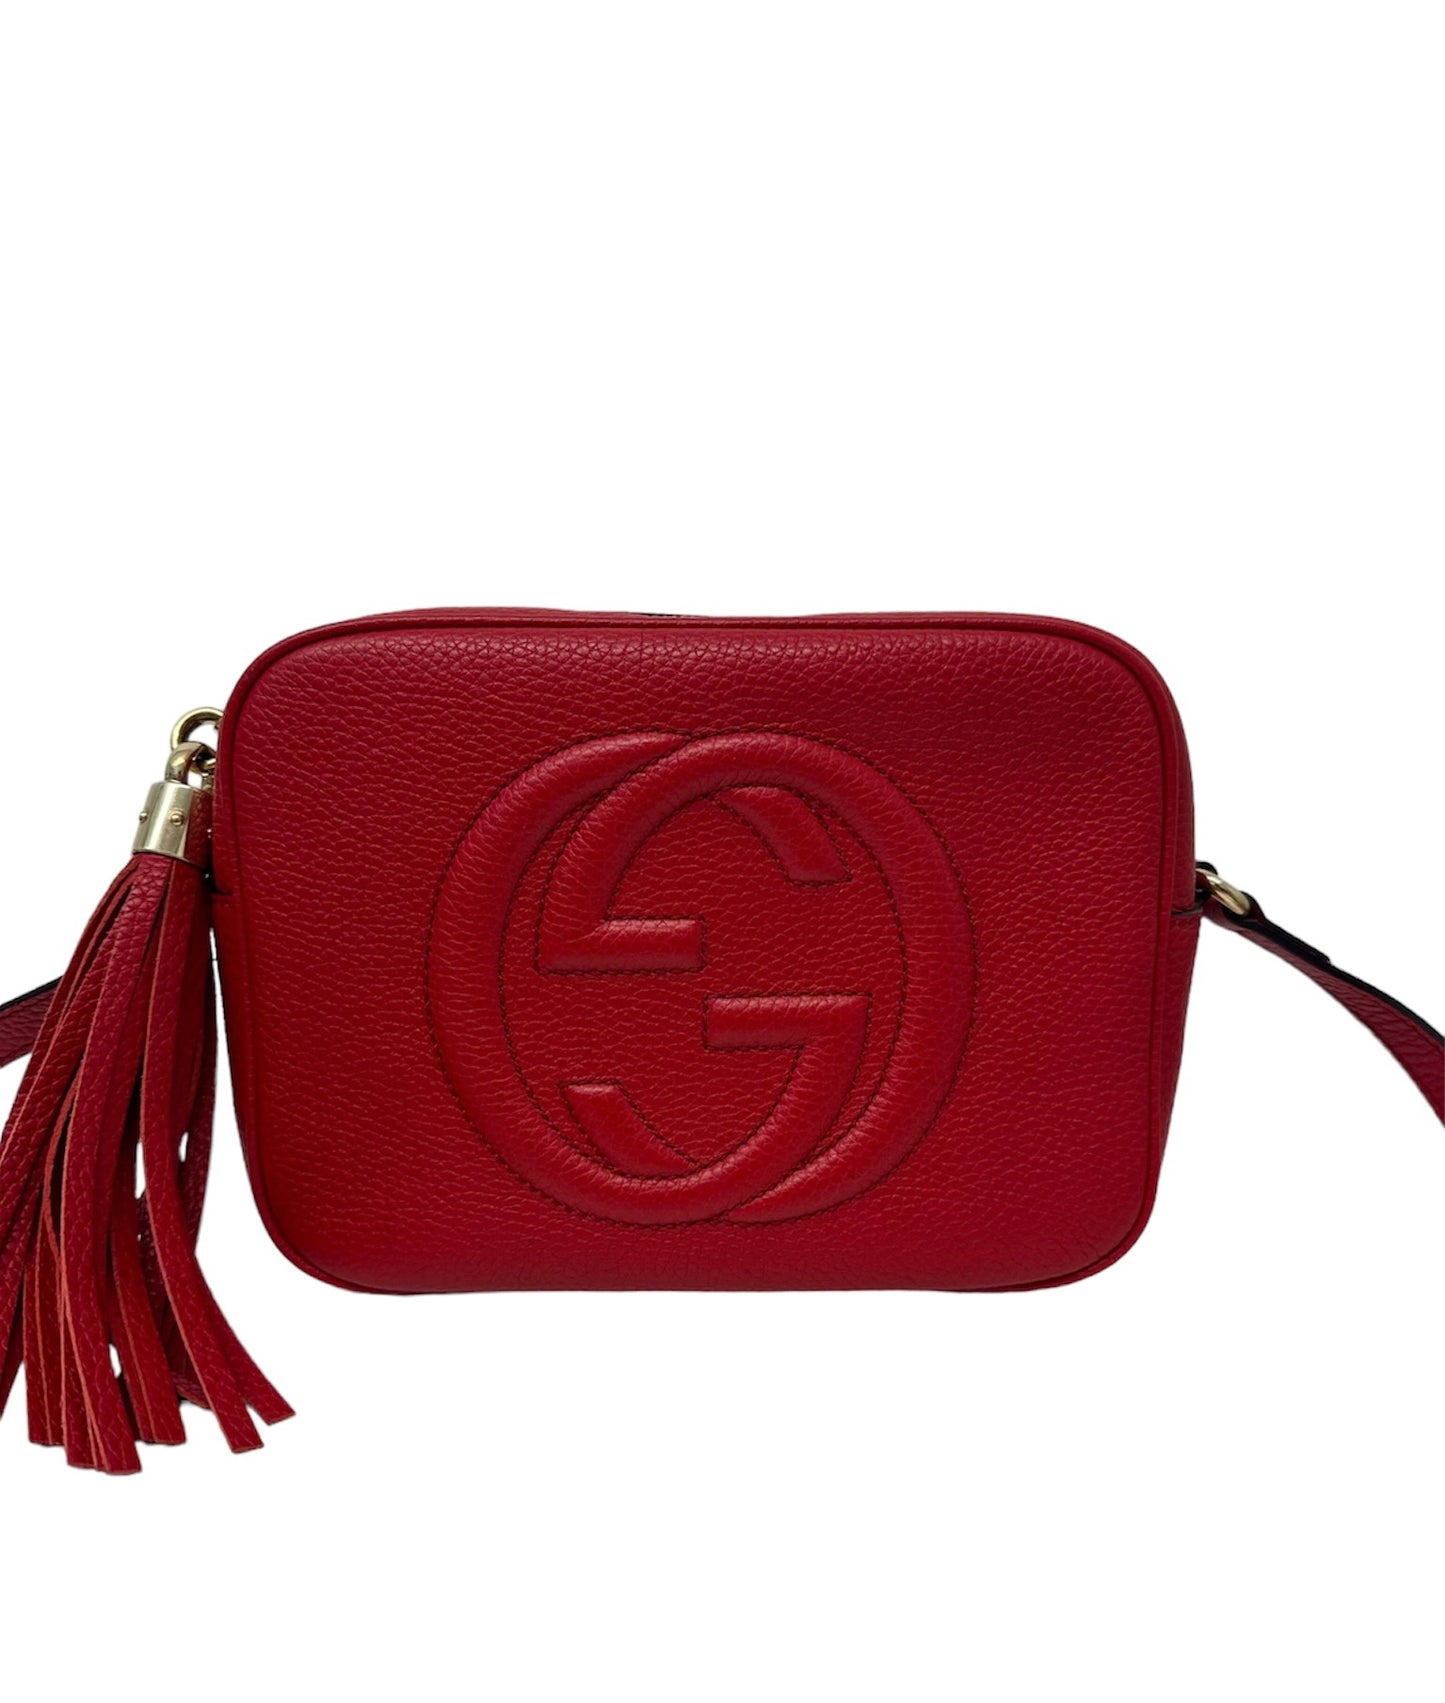 GUCCI - Red Pebbled Leather Soho Disco